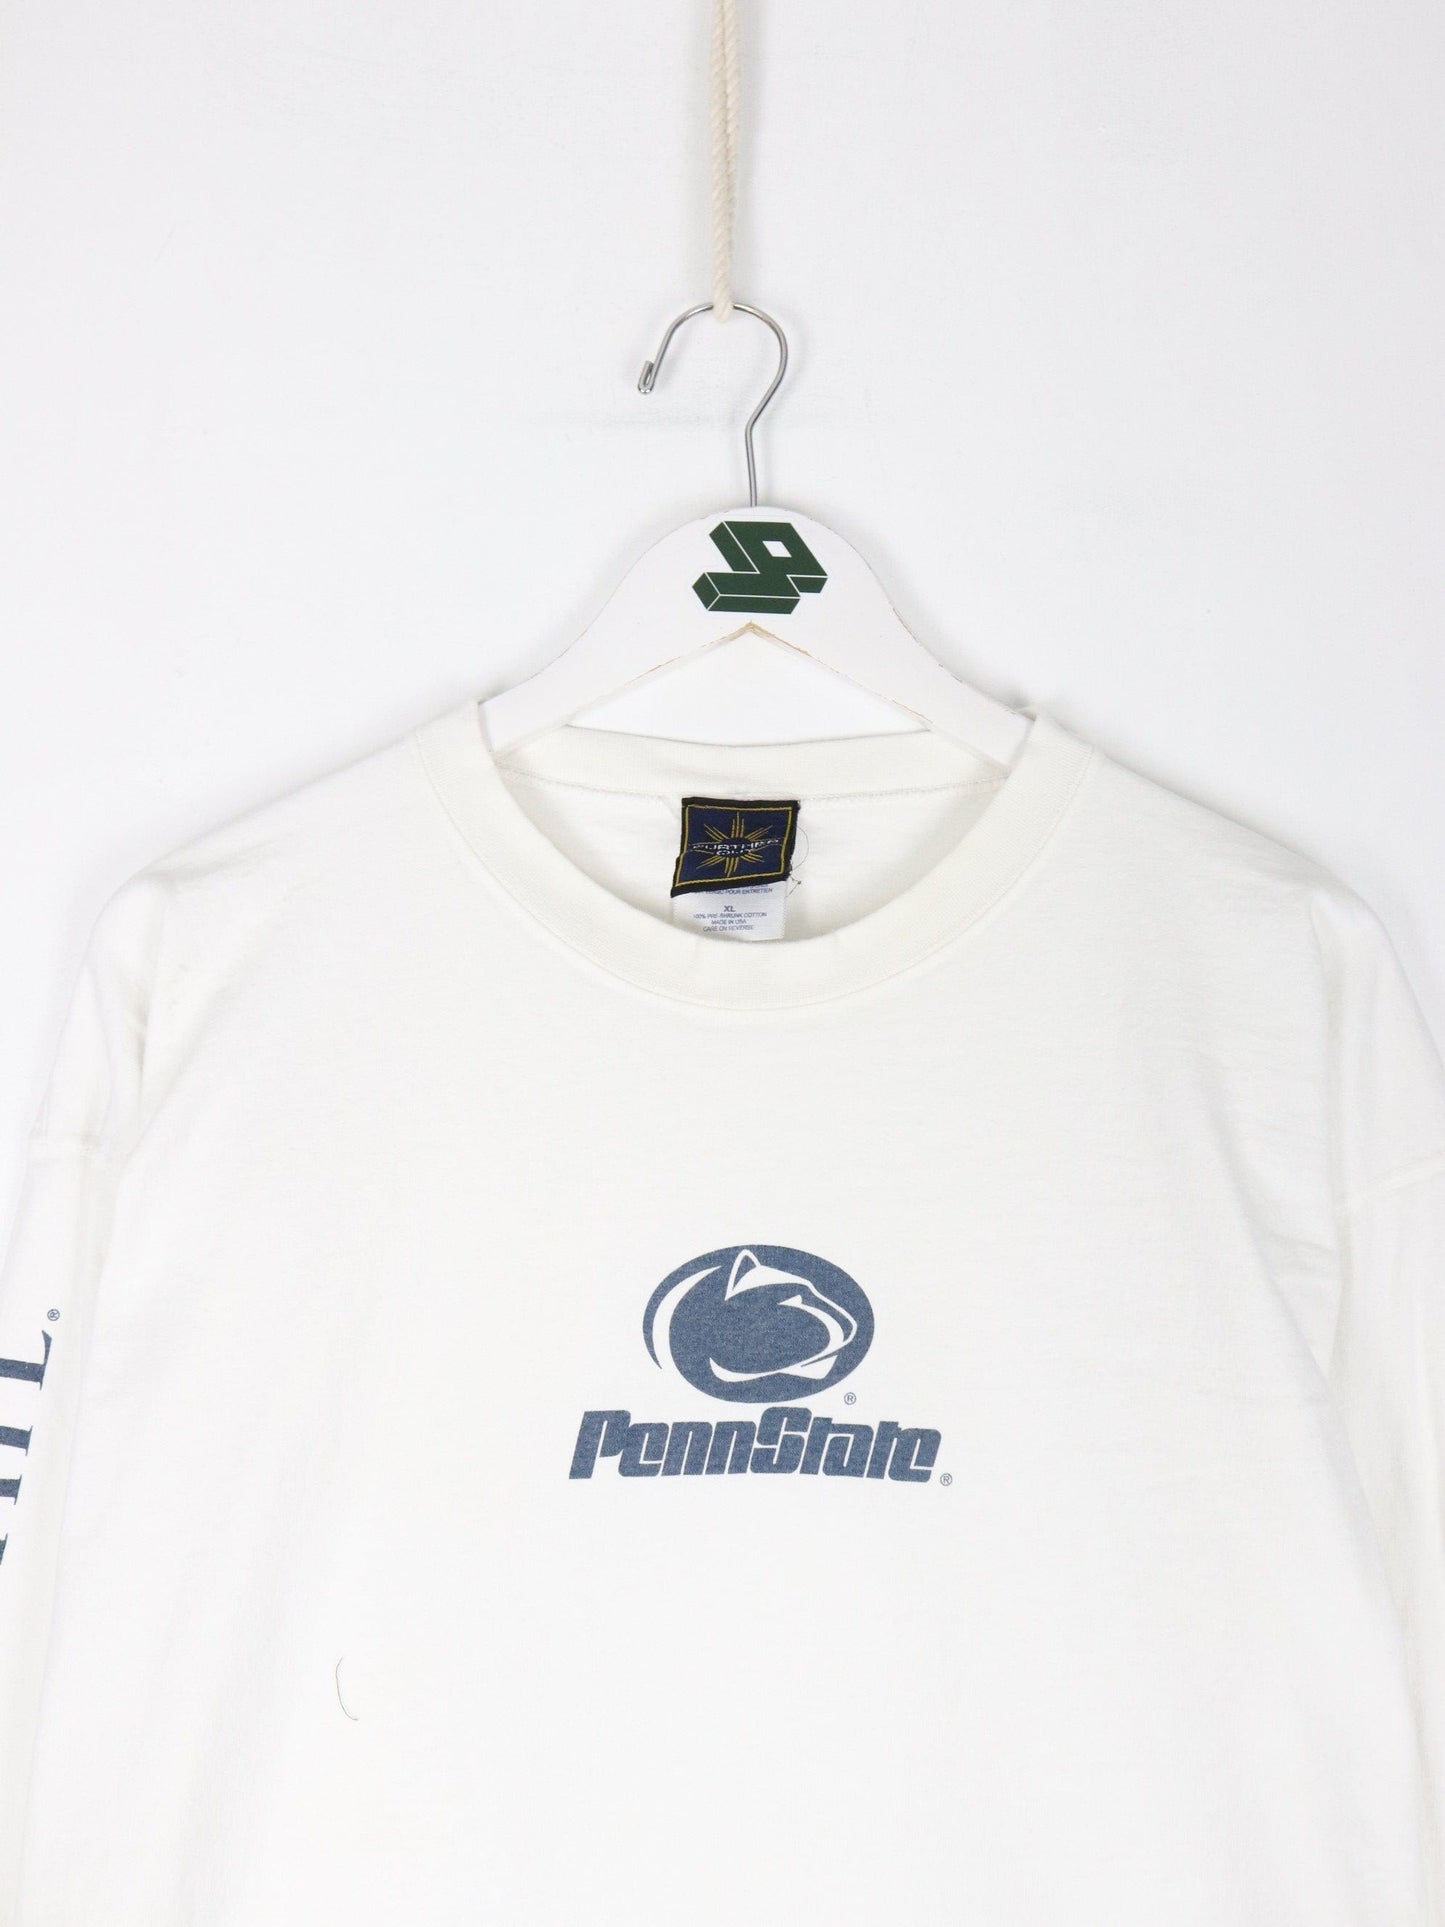 Other T-Shirts & Tank Tops Vintage Penn State Nittany Lions T Shirt Mens XL White Long Sleeve College